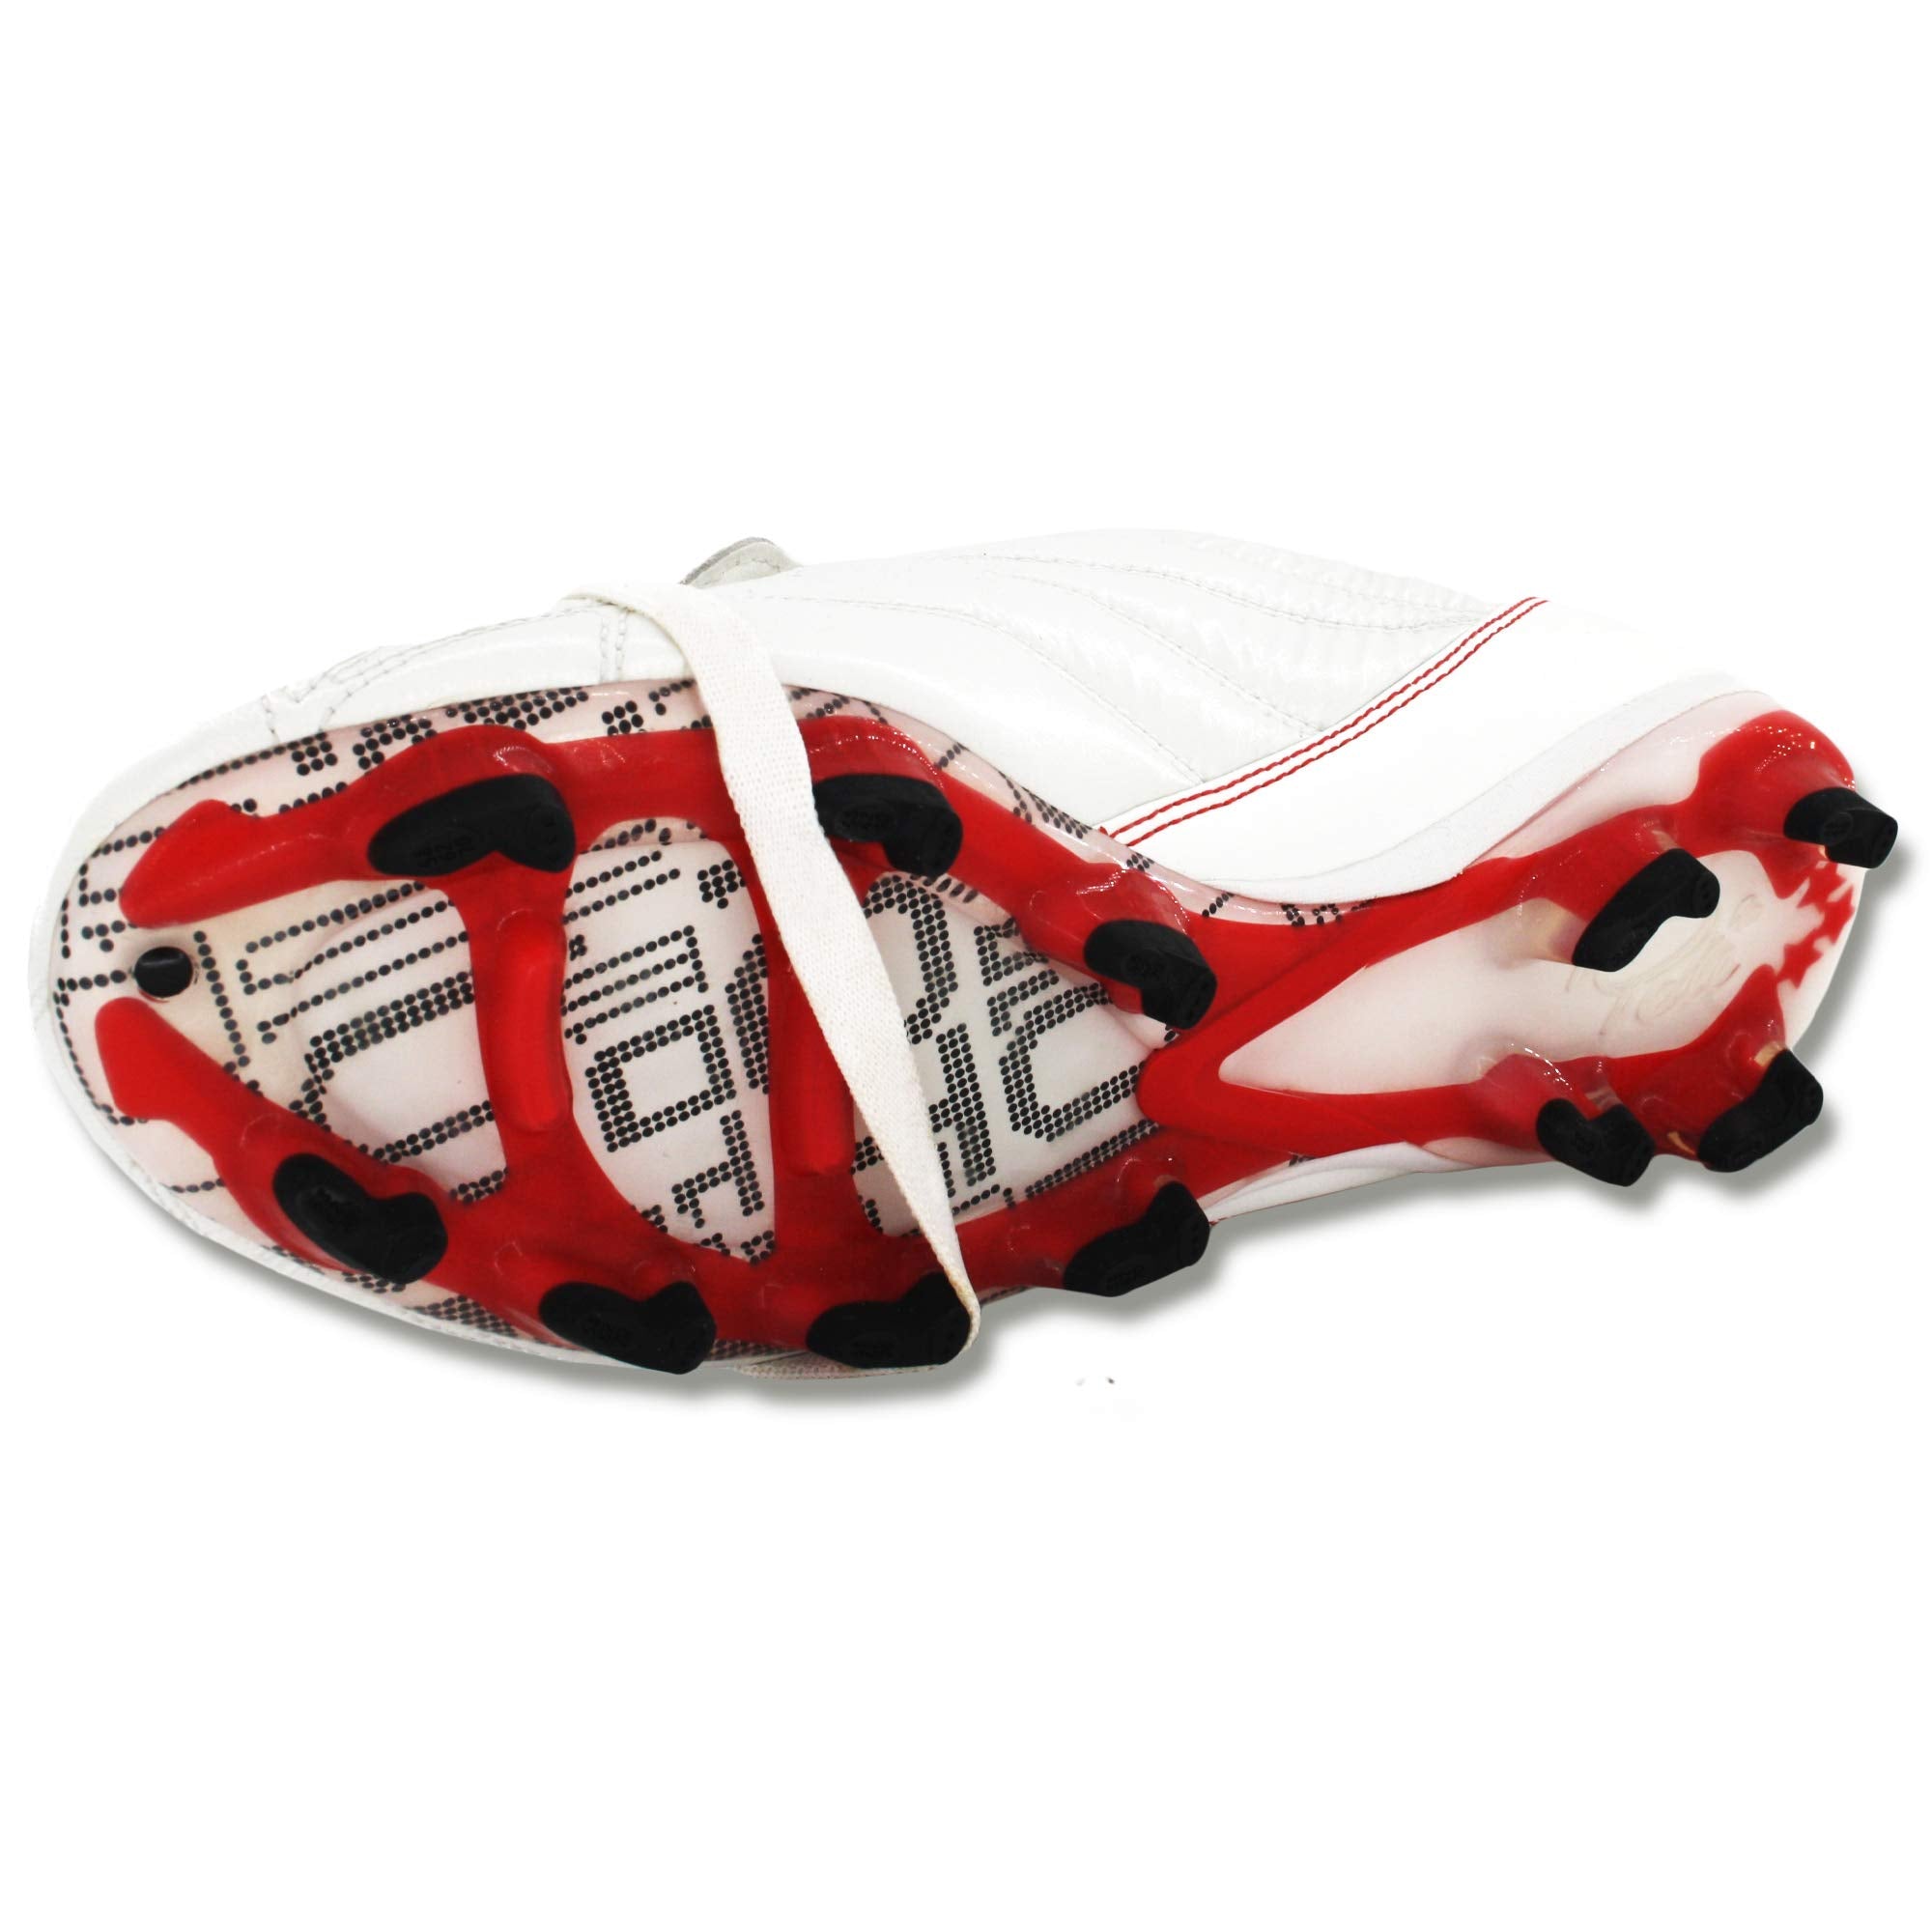 Pele Sports Kid's 1962 FG MS Junior Football Boots - White / Red